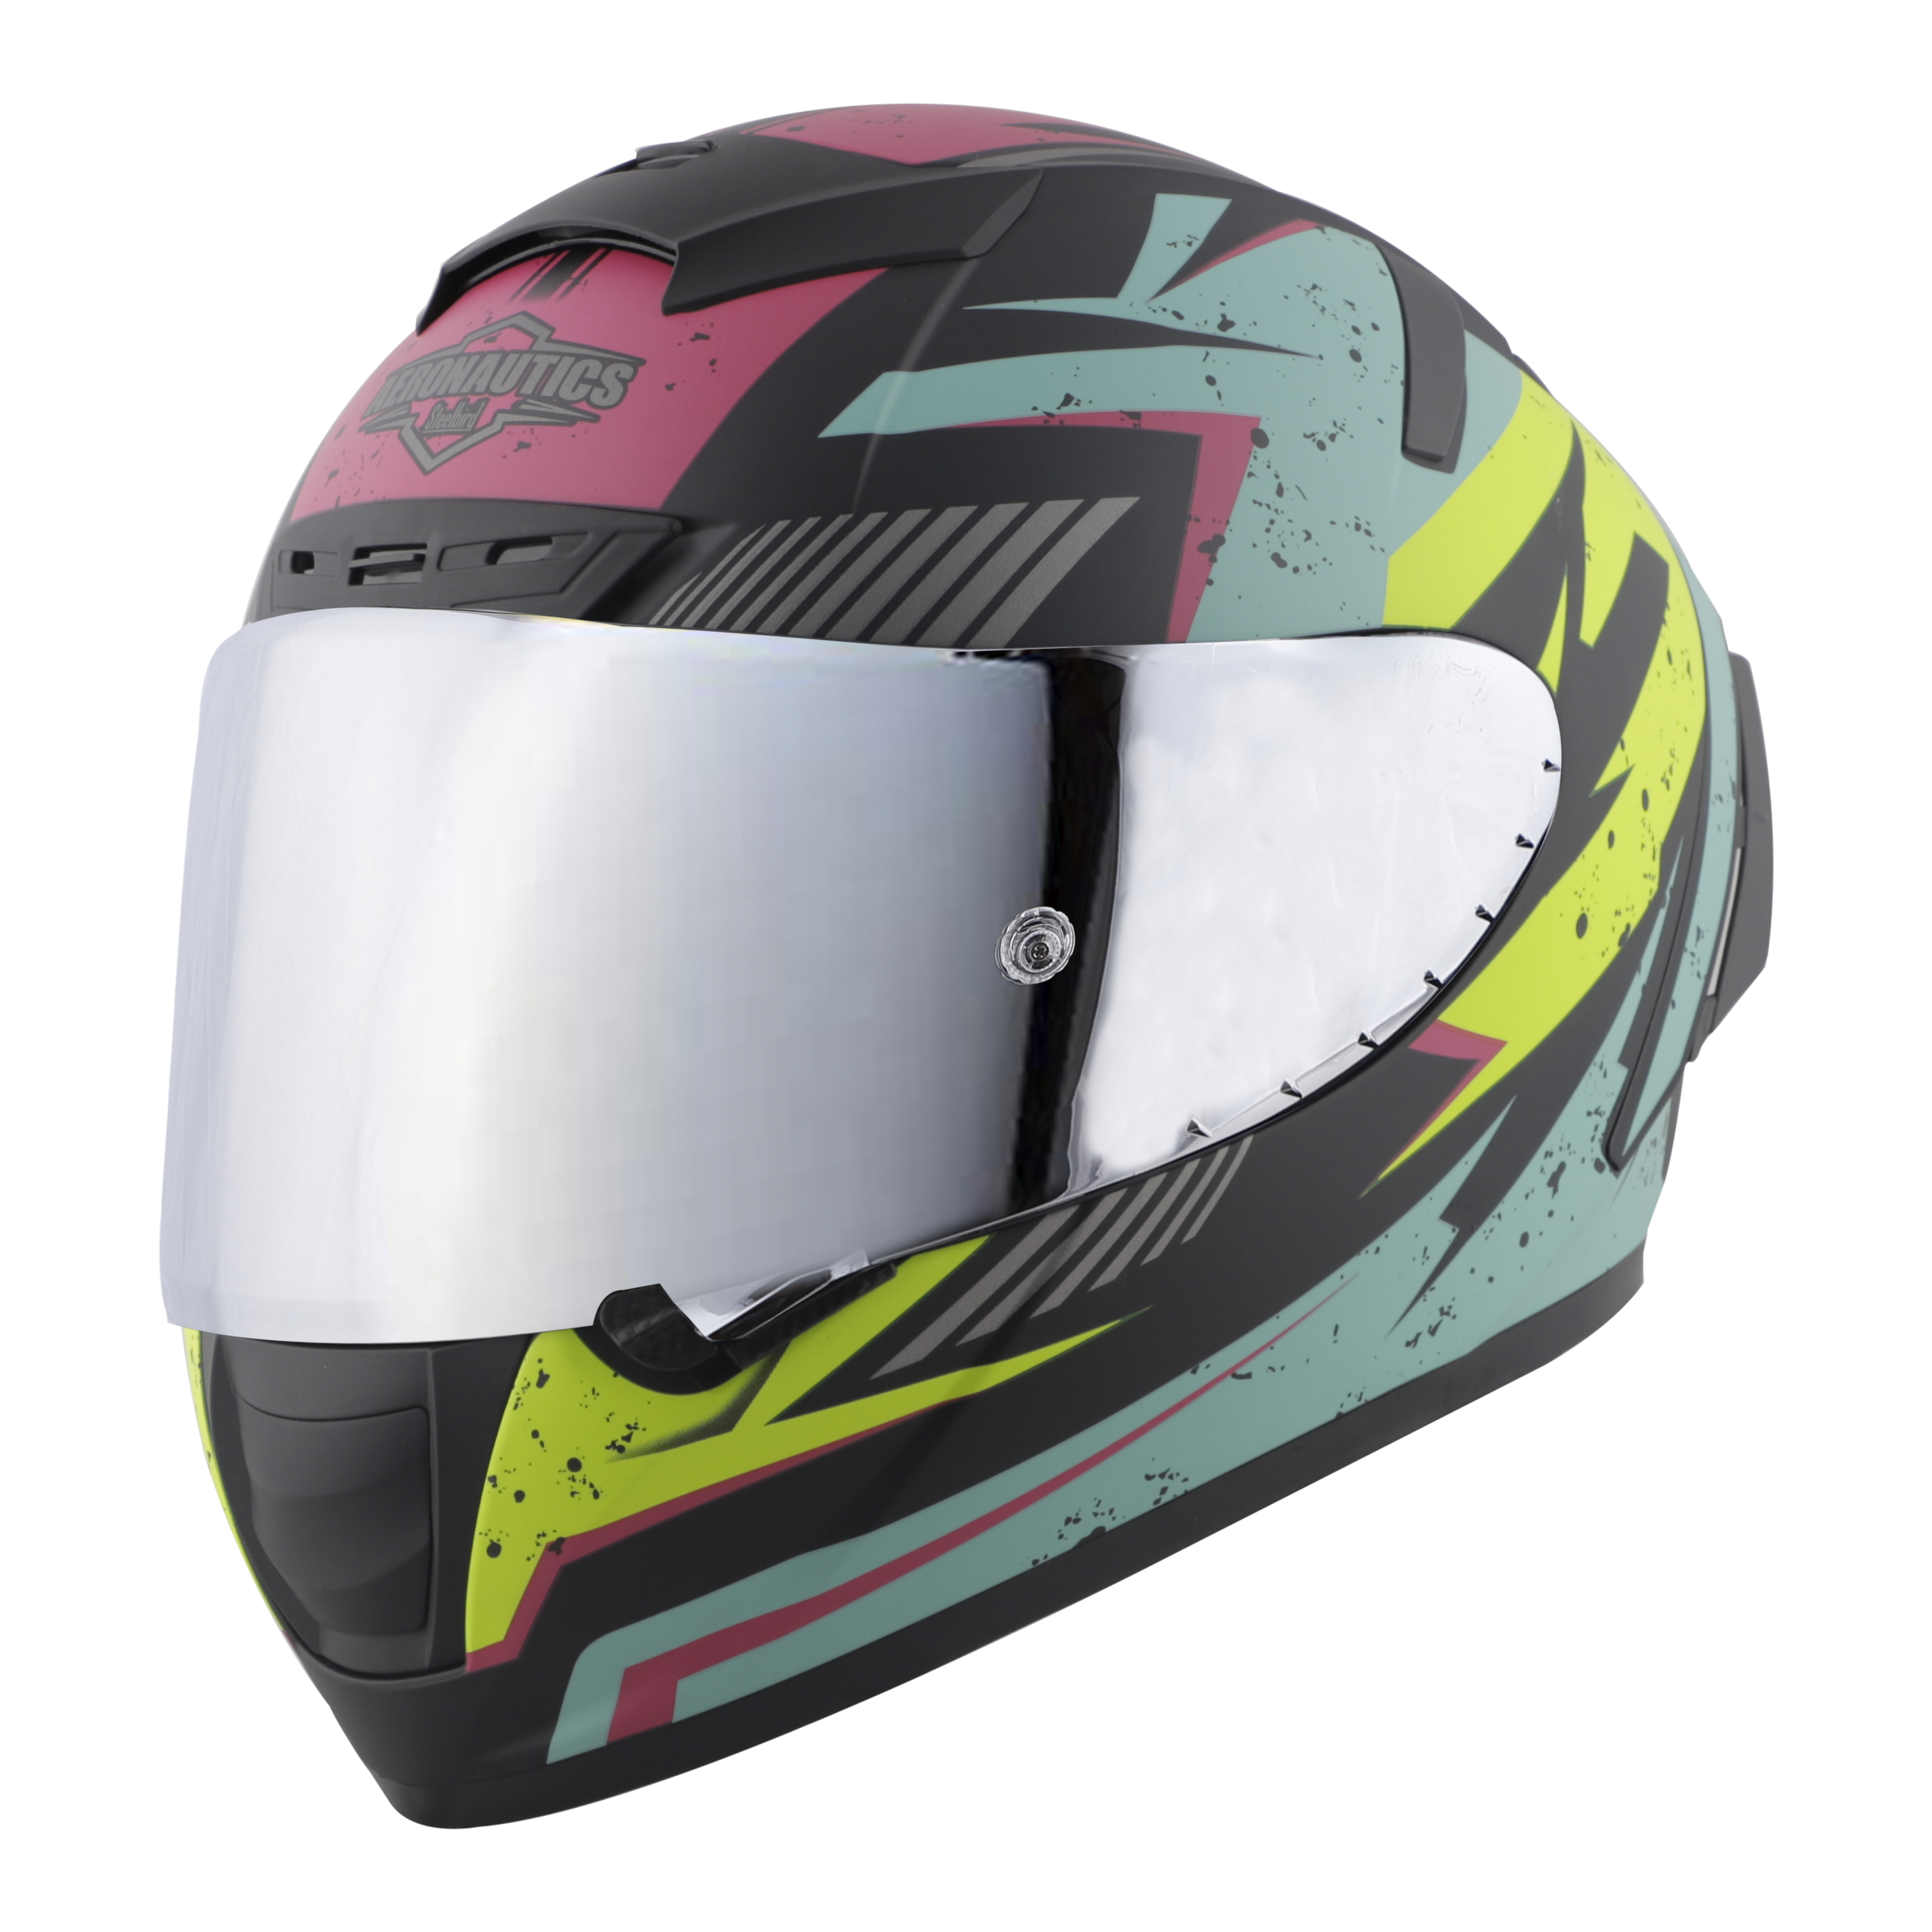 SA-2 BREEZER MAT BLACK WITH LIGHT BLUE FITTED WITH CLEAR VISOR EXTRA CHROME SILVER VISOR FREE (WITH ANTI-FOG SHIELD HOLDER)